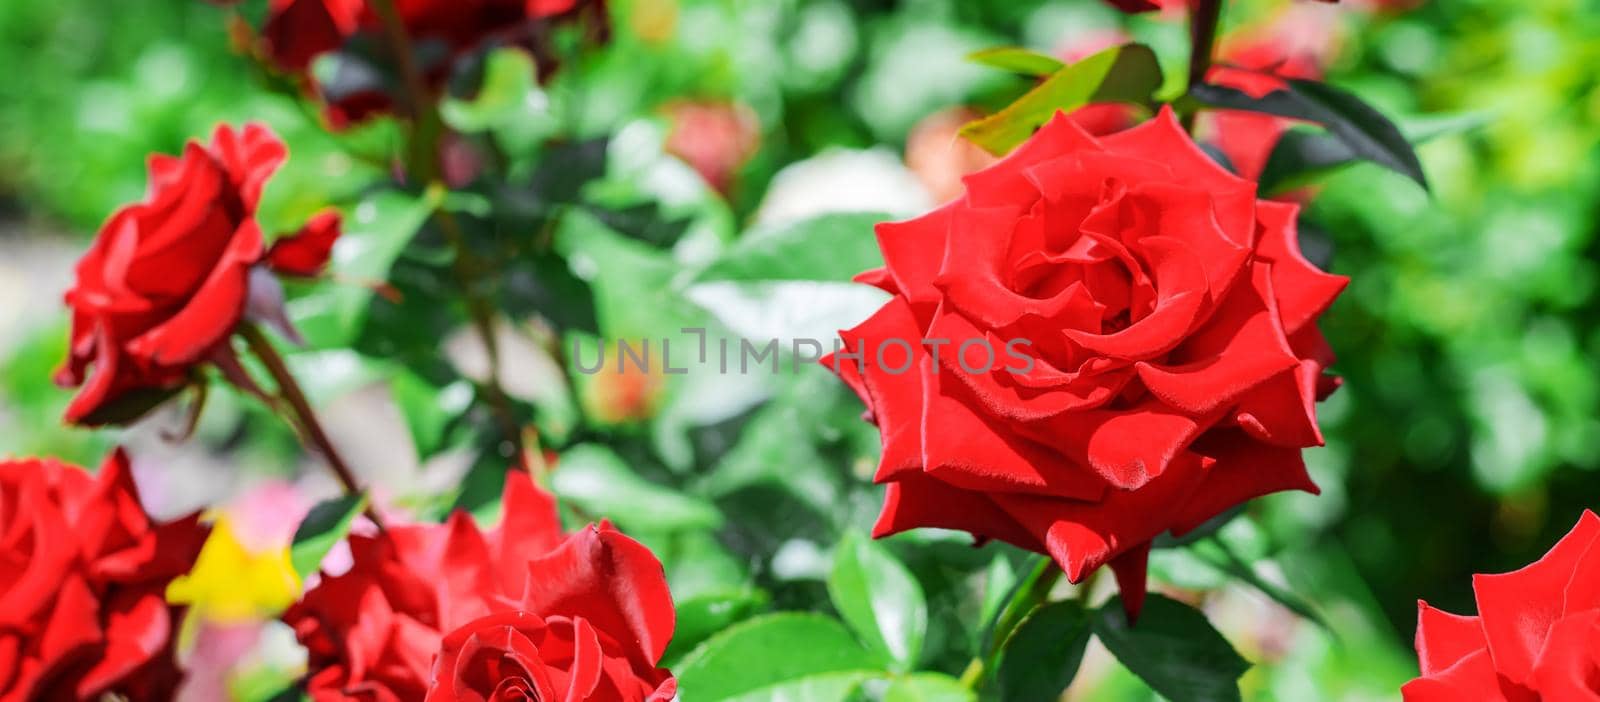 background of blooming roses in the garden.selective focus nature